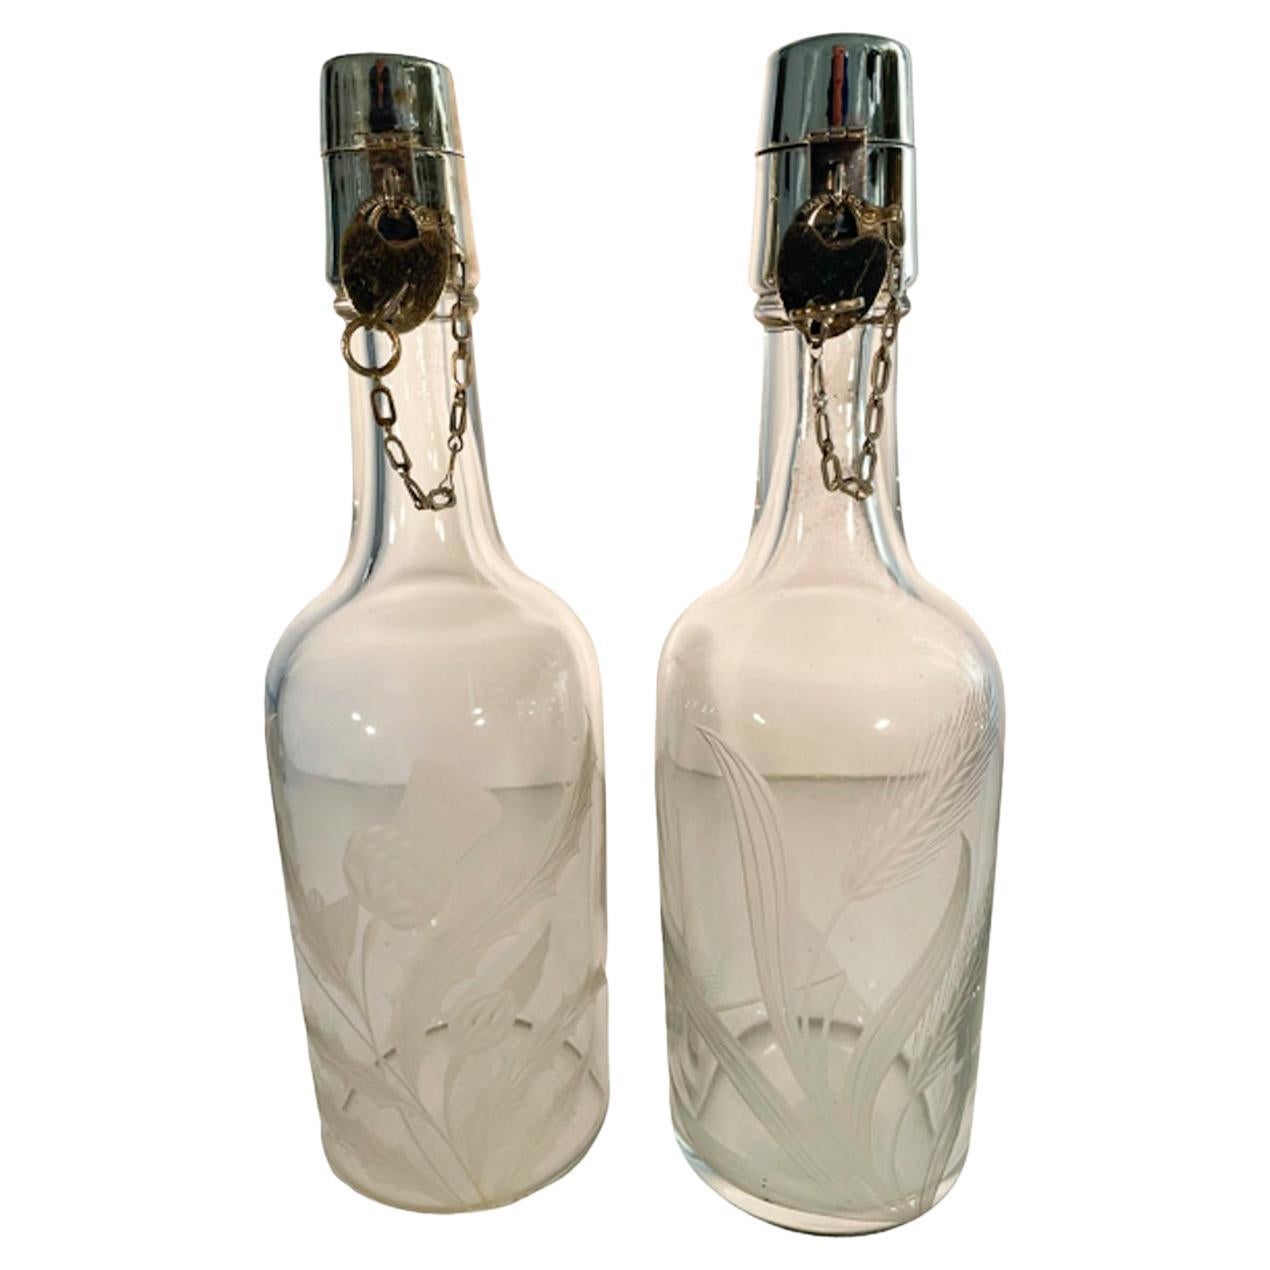 Pair of Sterling Silver Mounted Locking Liquor Bottles by T.G. Hawkes